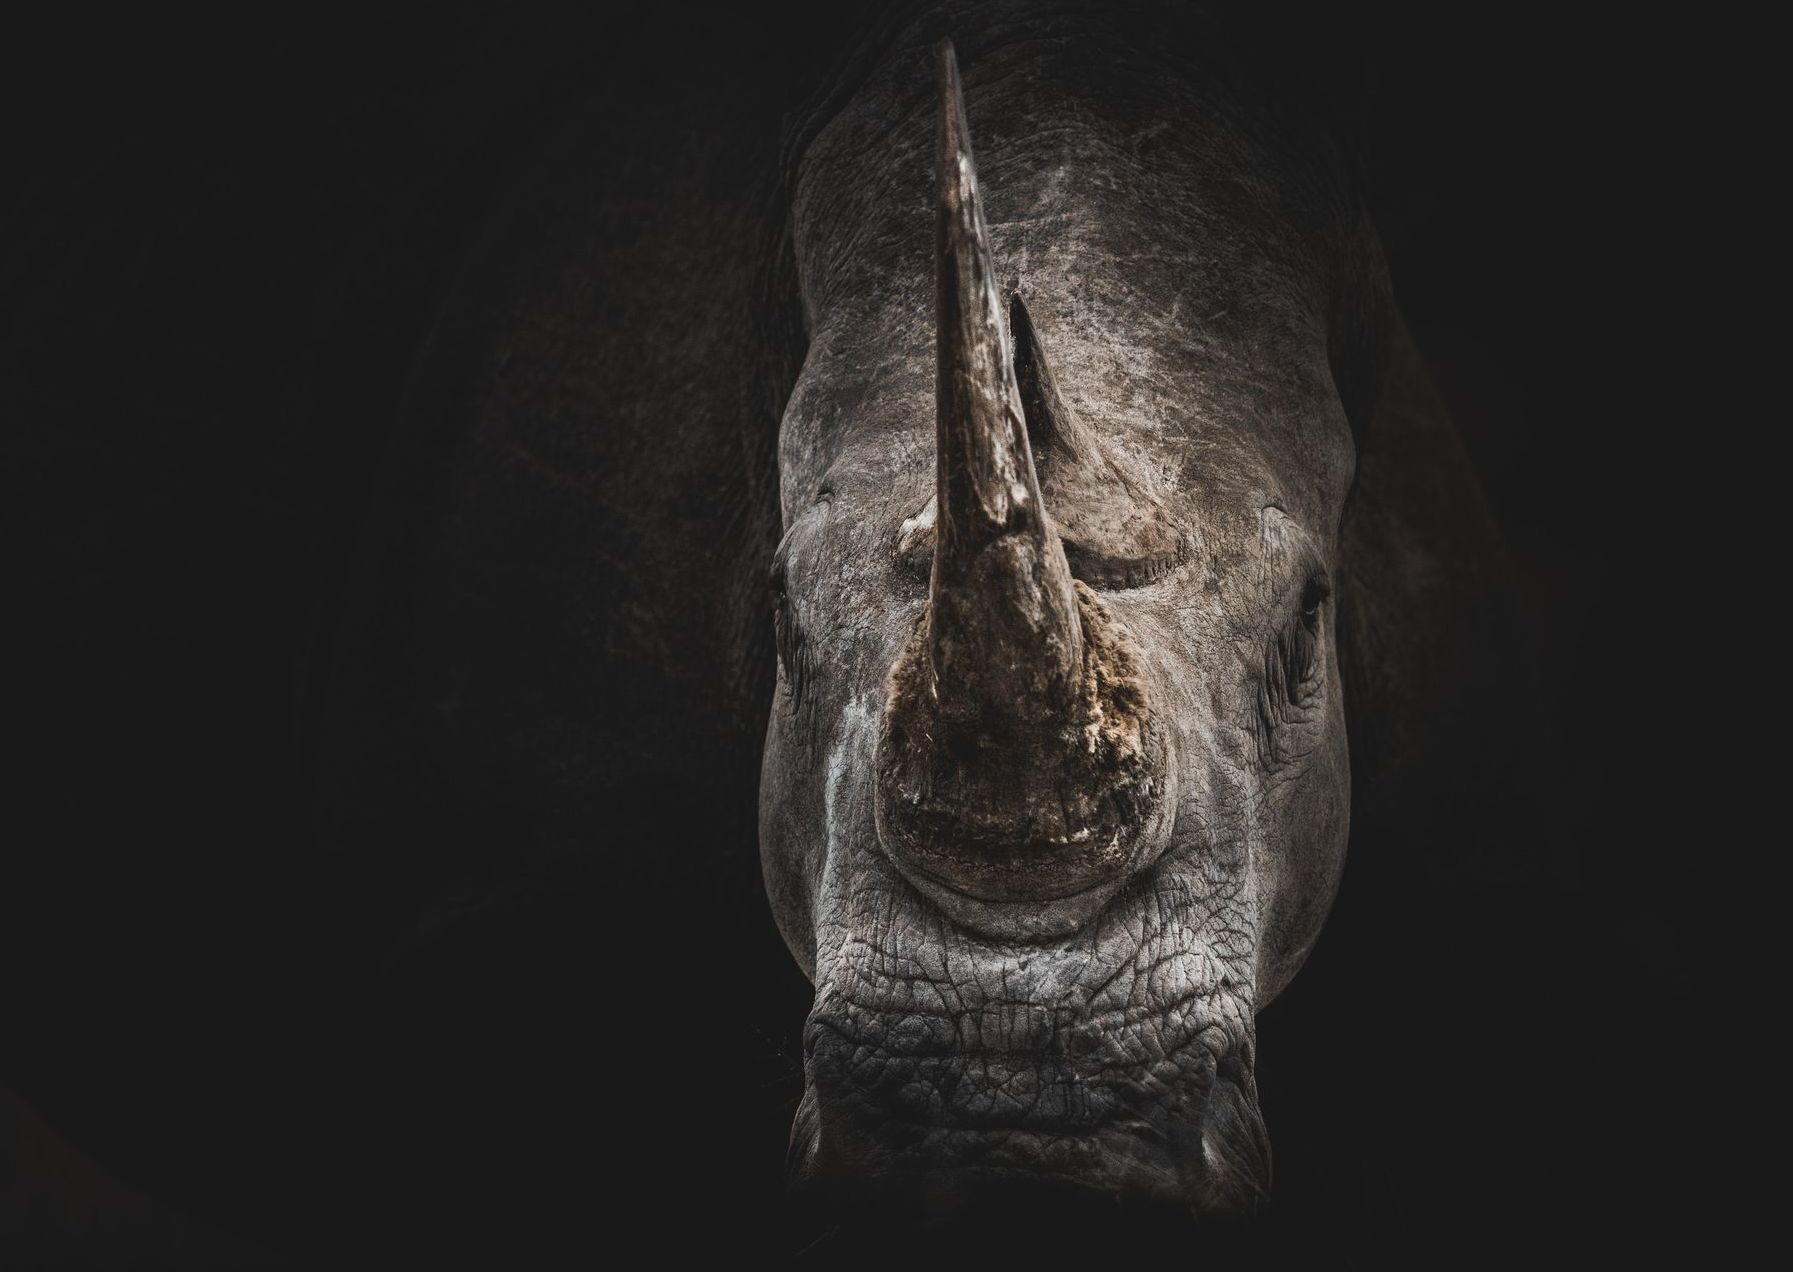 Rhino Wars: Attack of the DronesA New Hope to Stop Poachers